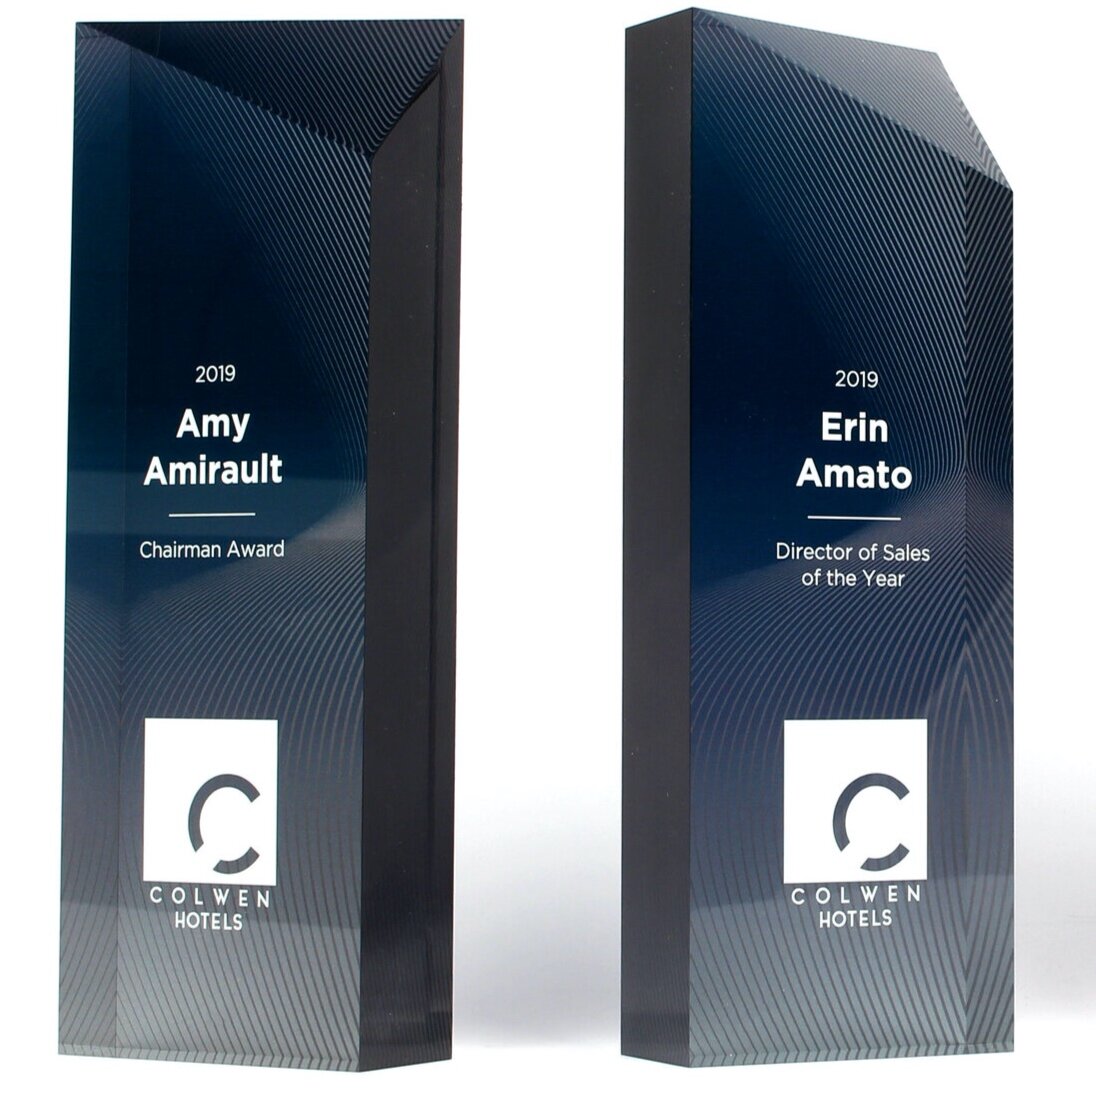 A modern and unique award crafted from diamond polished acrylic so it looks like glass or crystal. High quality awards and trophies perfect for any corporate event or employee recognition program. 